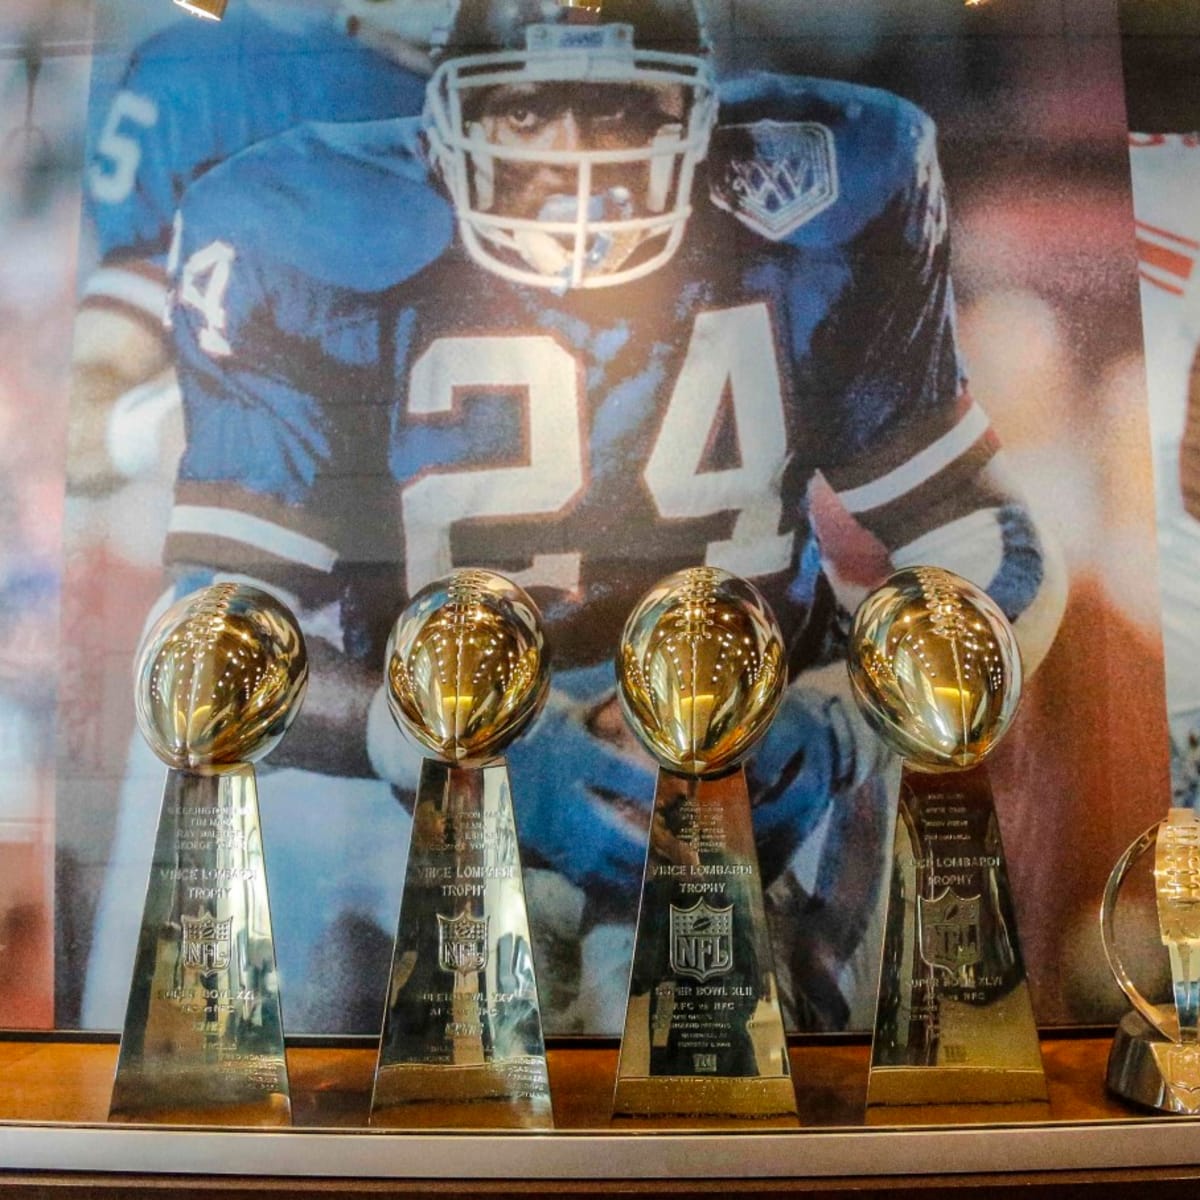 10 Greatest Wins in New York Giants History - Sports Illustrated